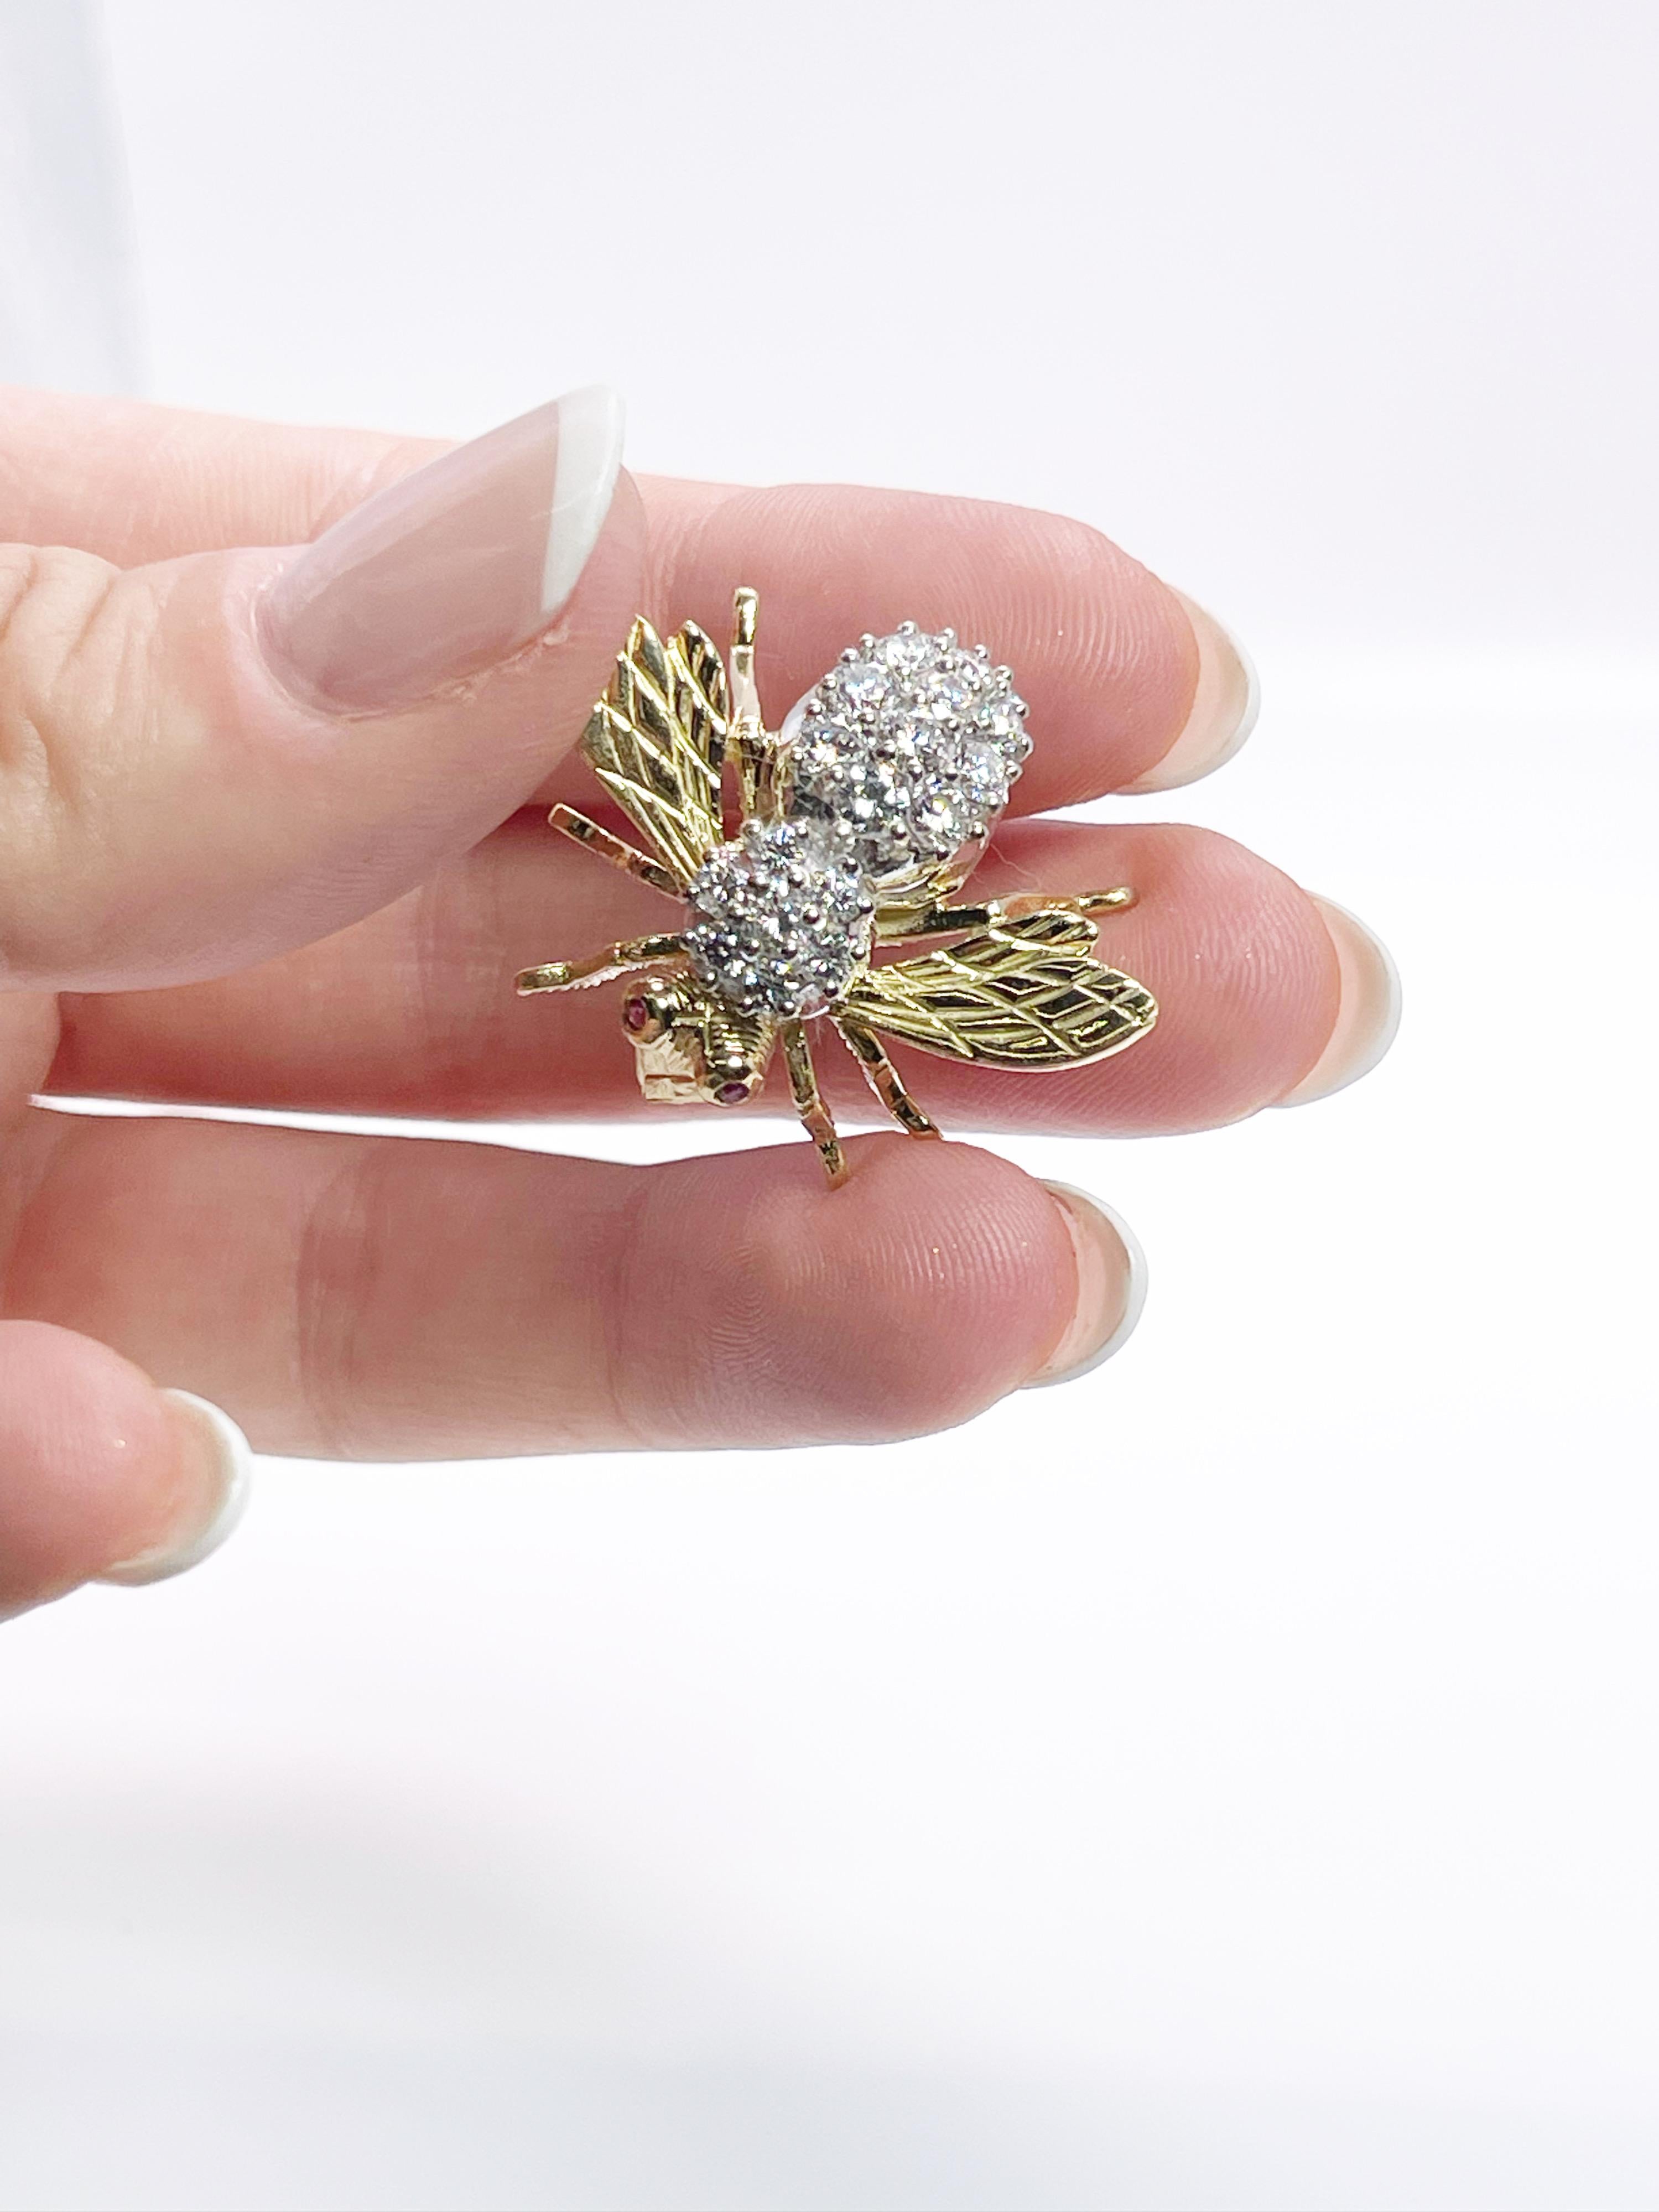 Brilliant Cut Herbert Rosenthal Large Bee Diamond Pin Brooch Rare Find 1.55 Carats For Sale